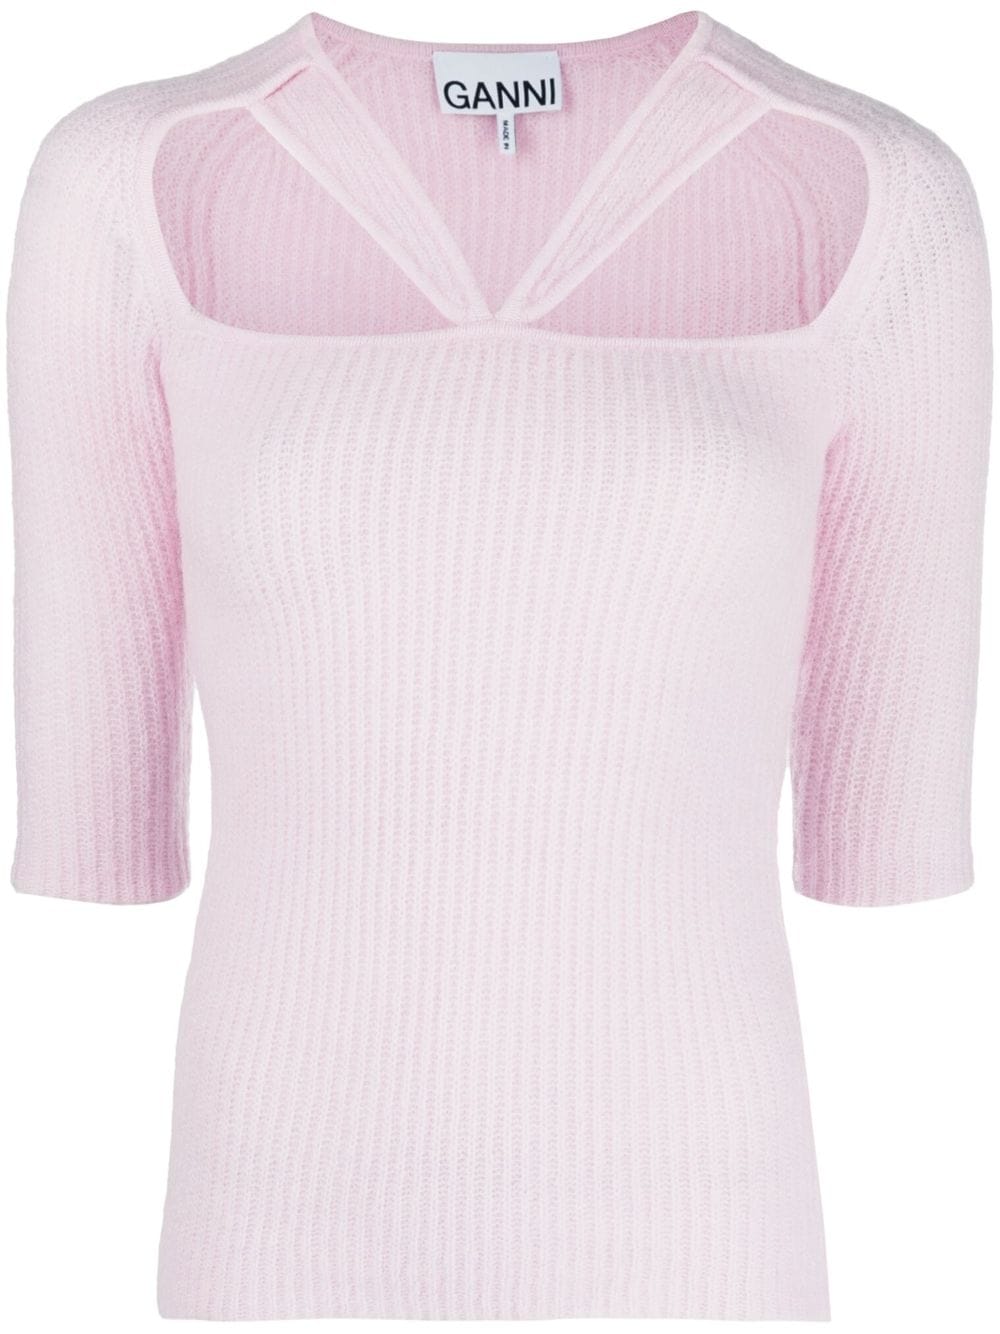 GANNI cut-out detail knitted top - Pink